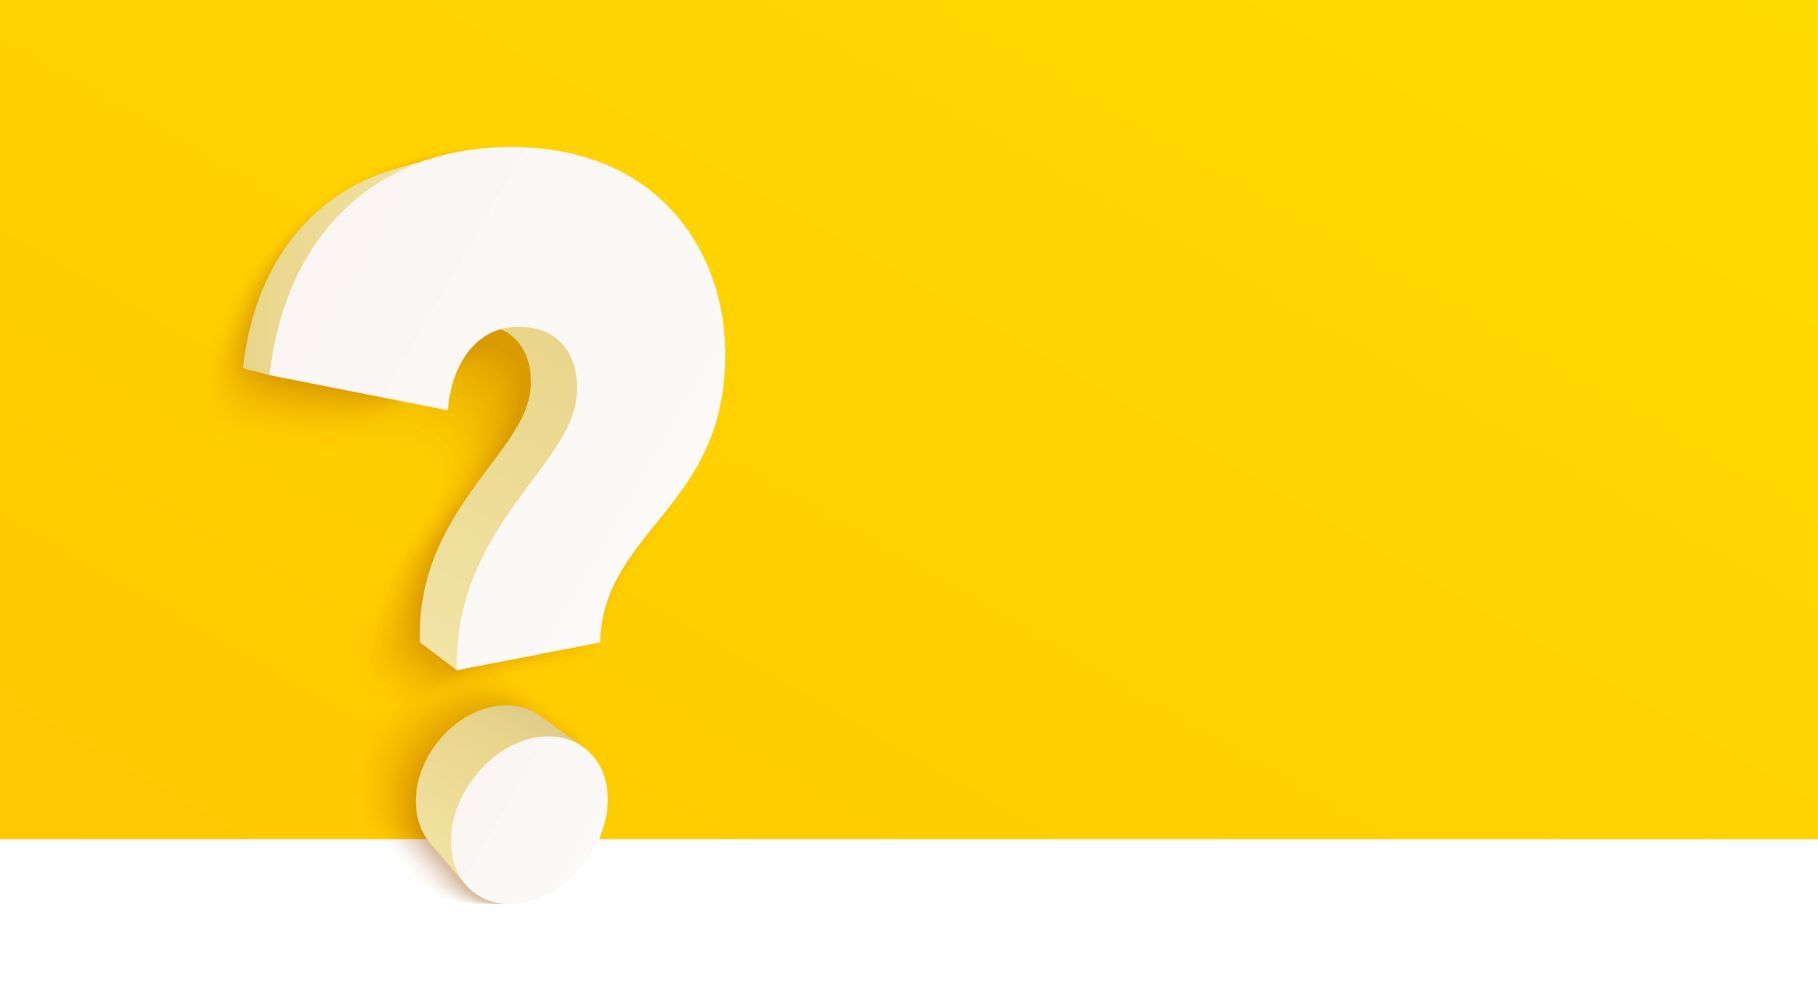 3d question mark on yellow background. Ask help information icon. Faq or Quiz big symbol